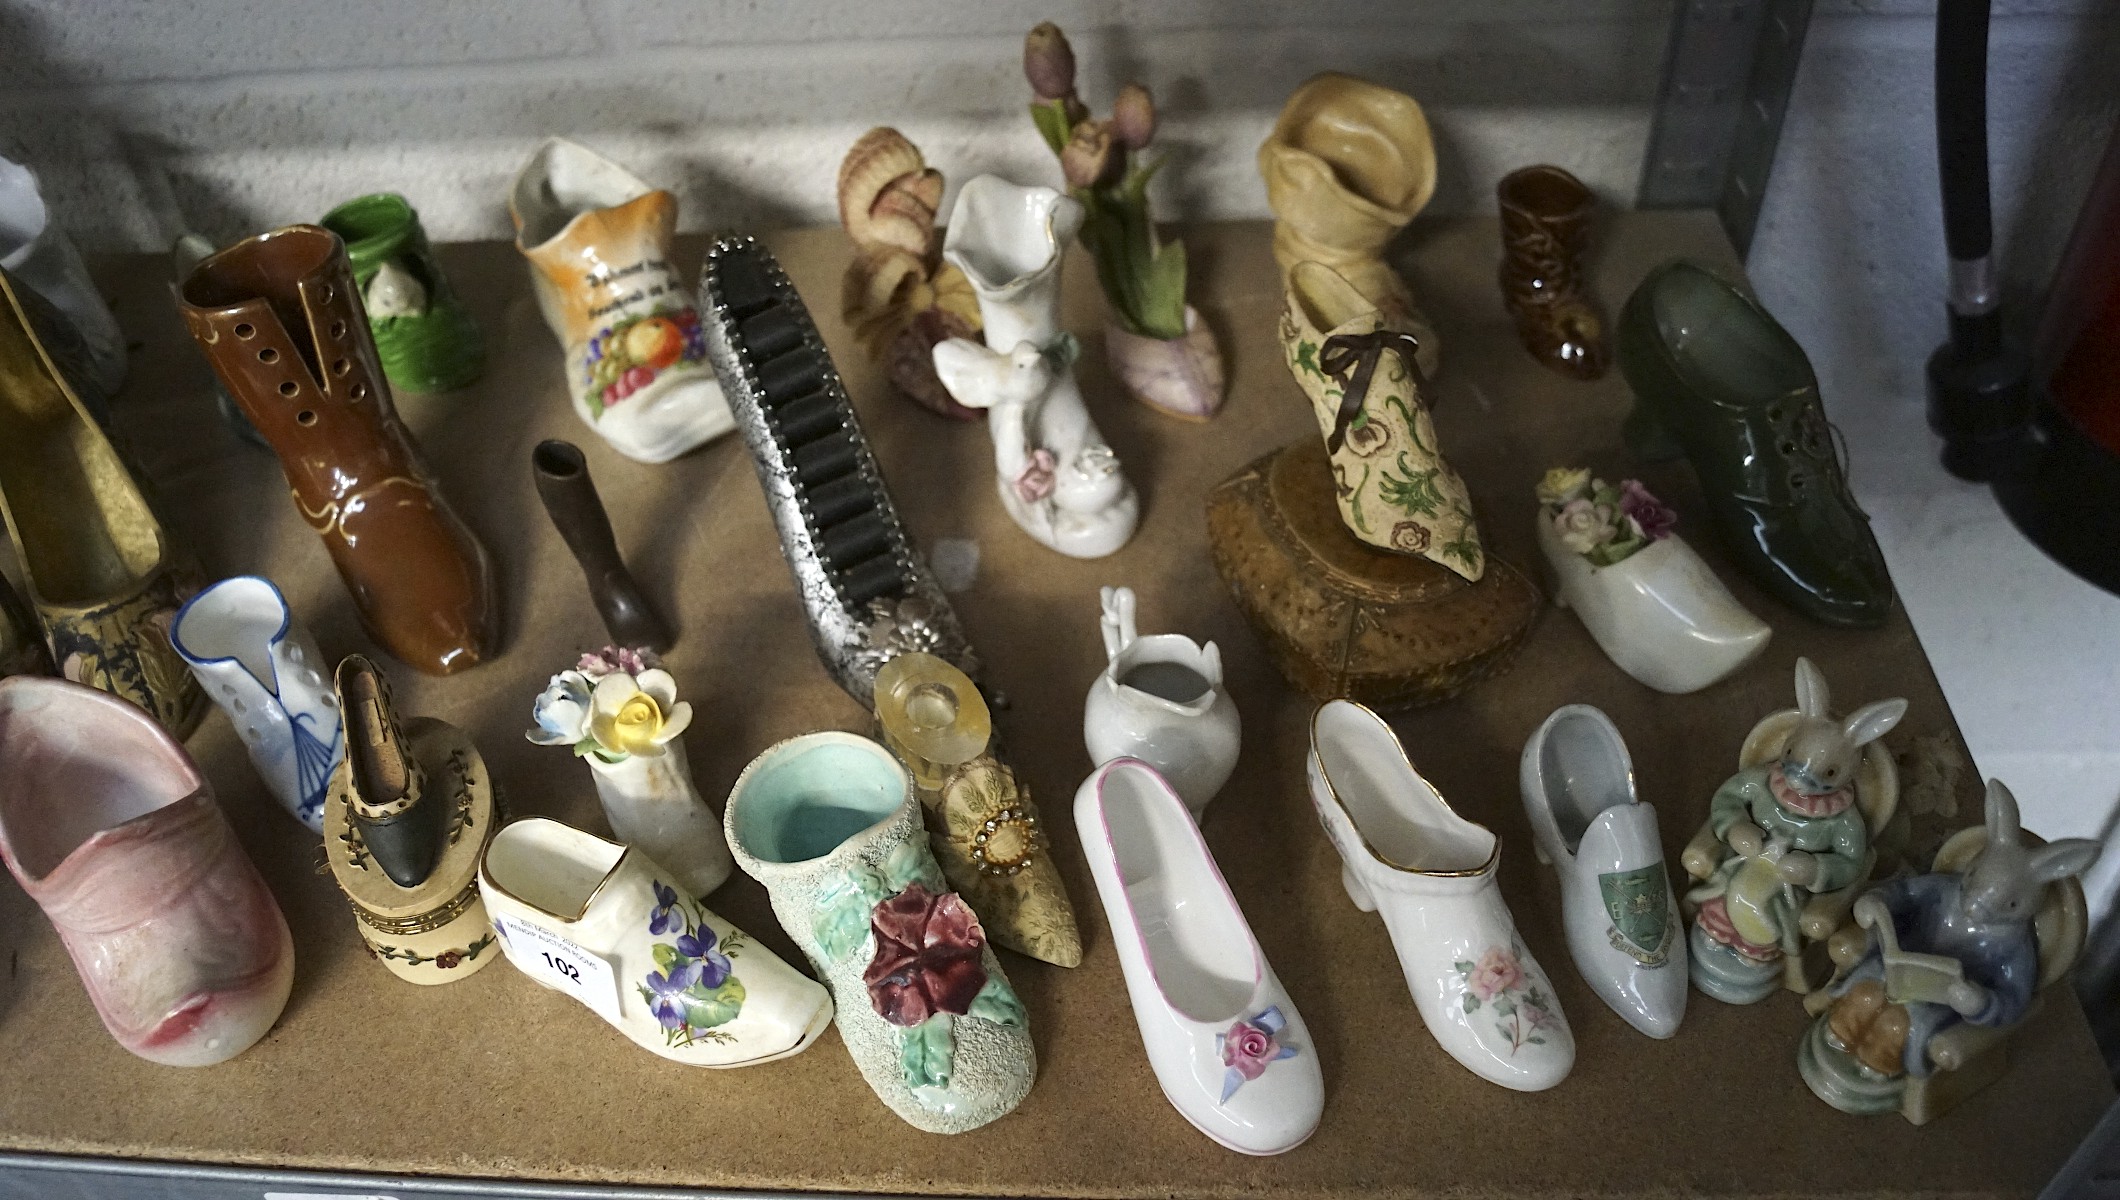 A large collection of ceramic and pottery shoe and boot ornaments, - Image 2 of 5